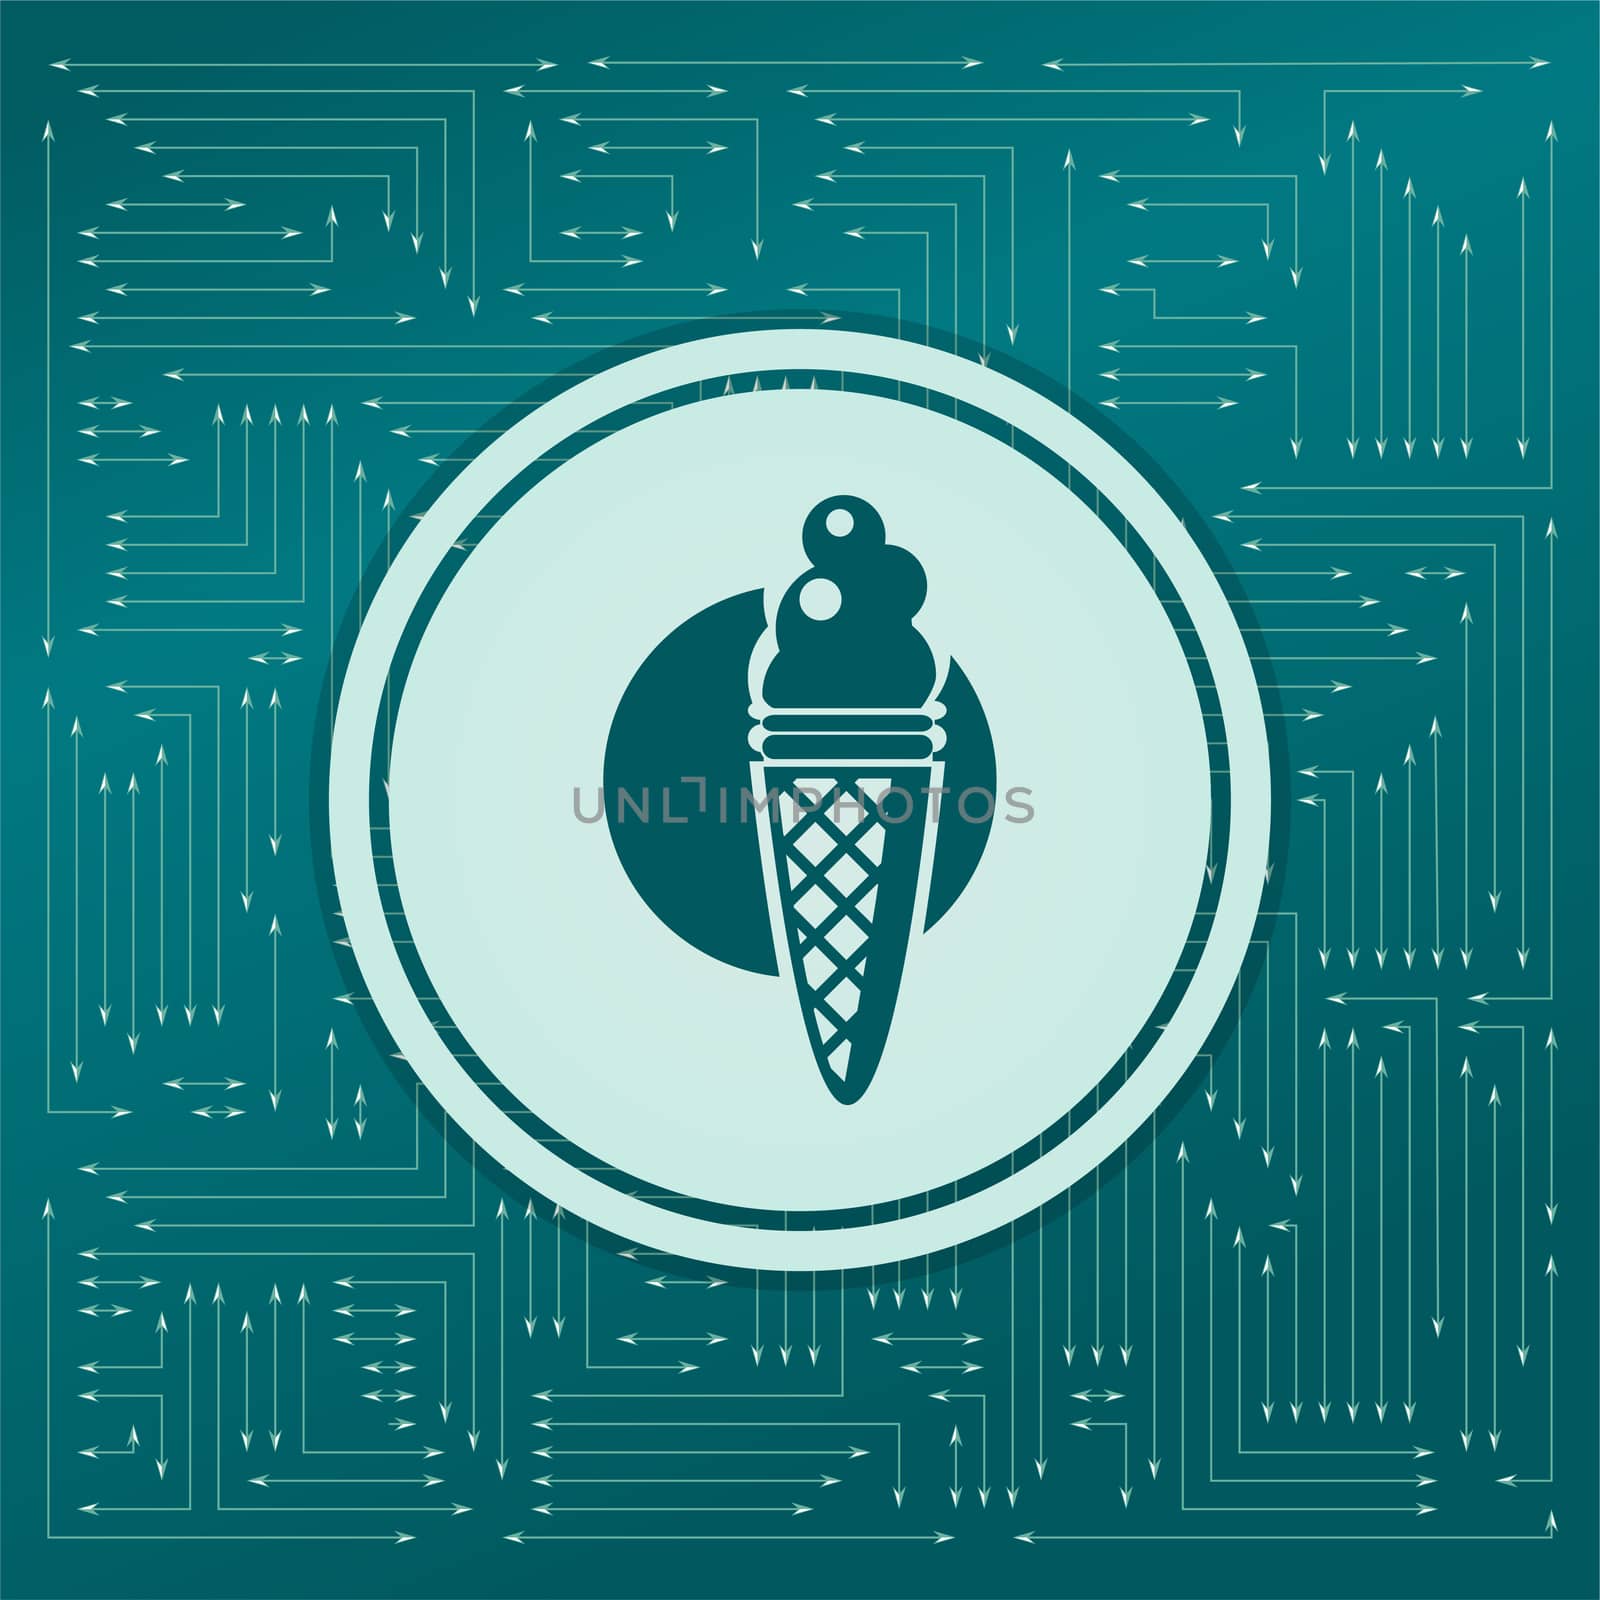 Ice Cream icon on a green background, with arrows in different directions. It appears the electronic board.  by Adamchuk